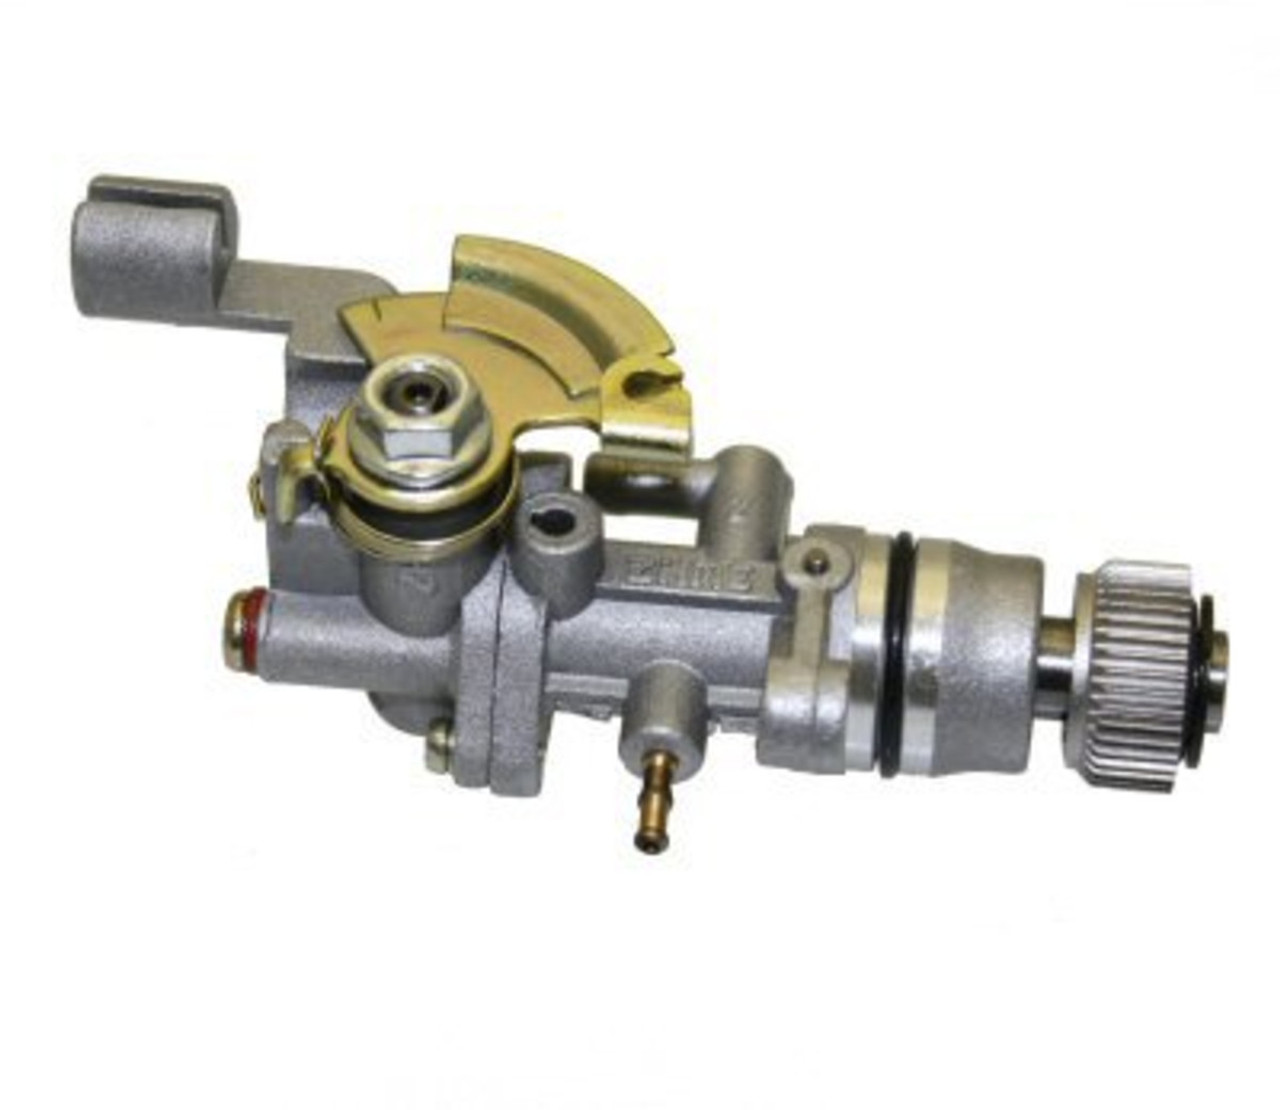 CABLE OPERATED OIL PUMP ASSEMBLY FOR 50cc 2-STROKE MINARELLI & JOG ENGINES